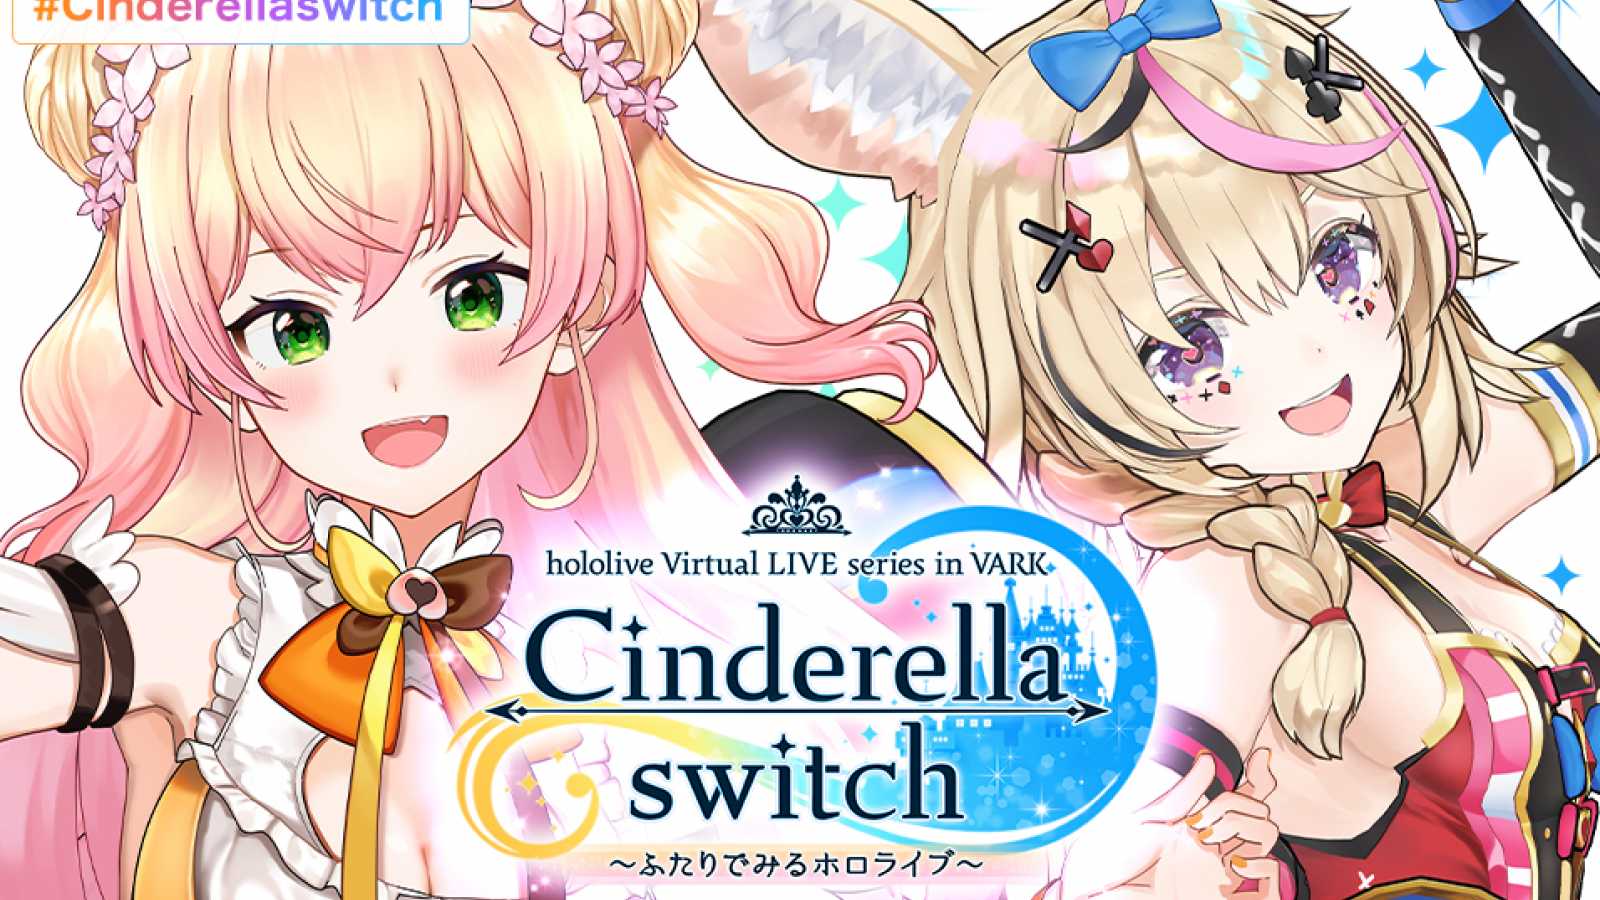 Momosuzu Nene and Omaru Polka to Headline "Cinderella Switch vol.7" Virtual Concert © VARK / Cover Corp. All rights reserved.